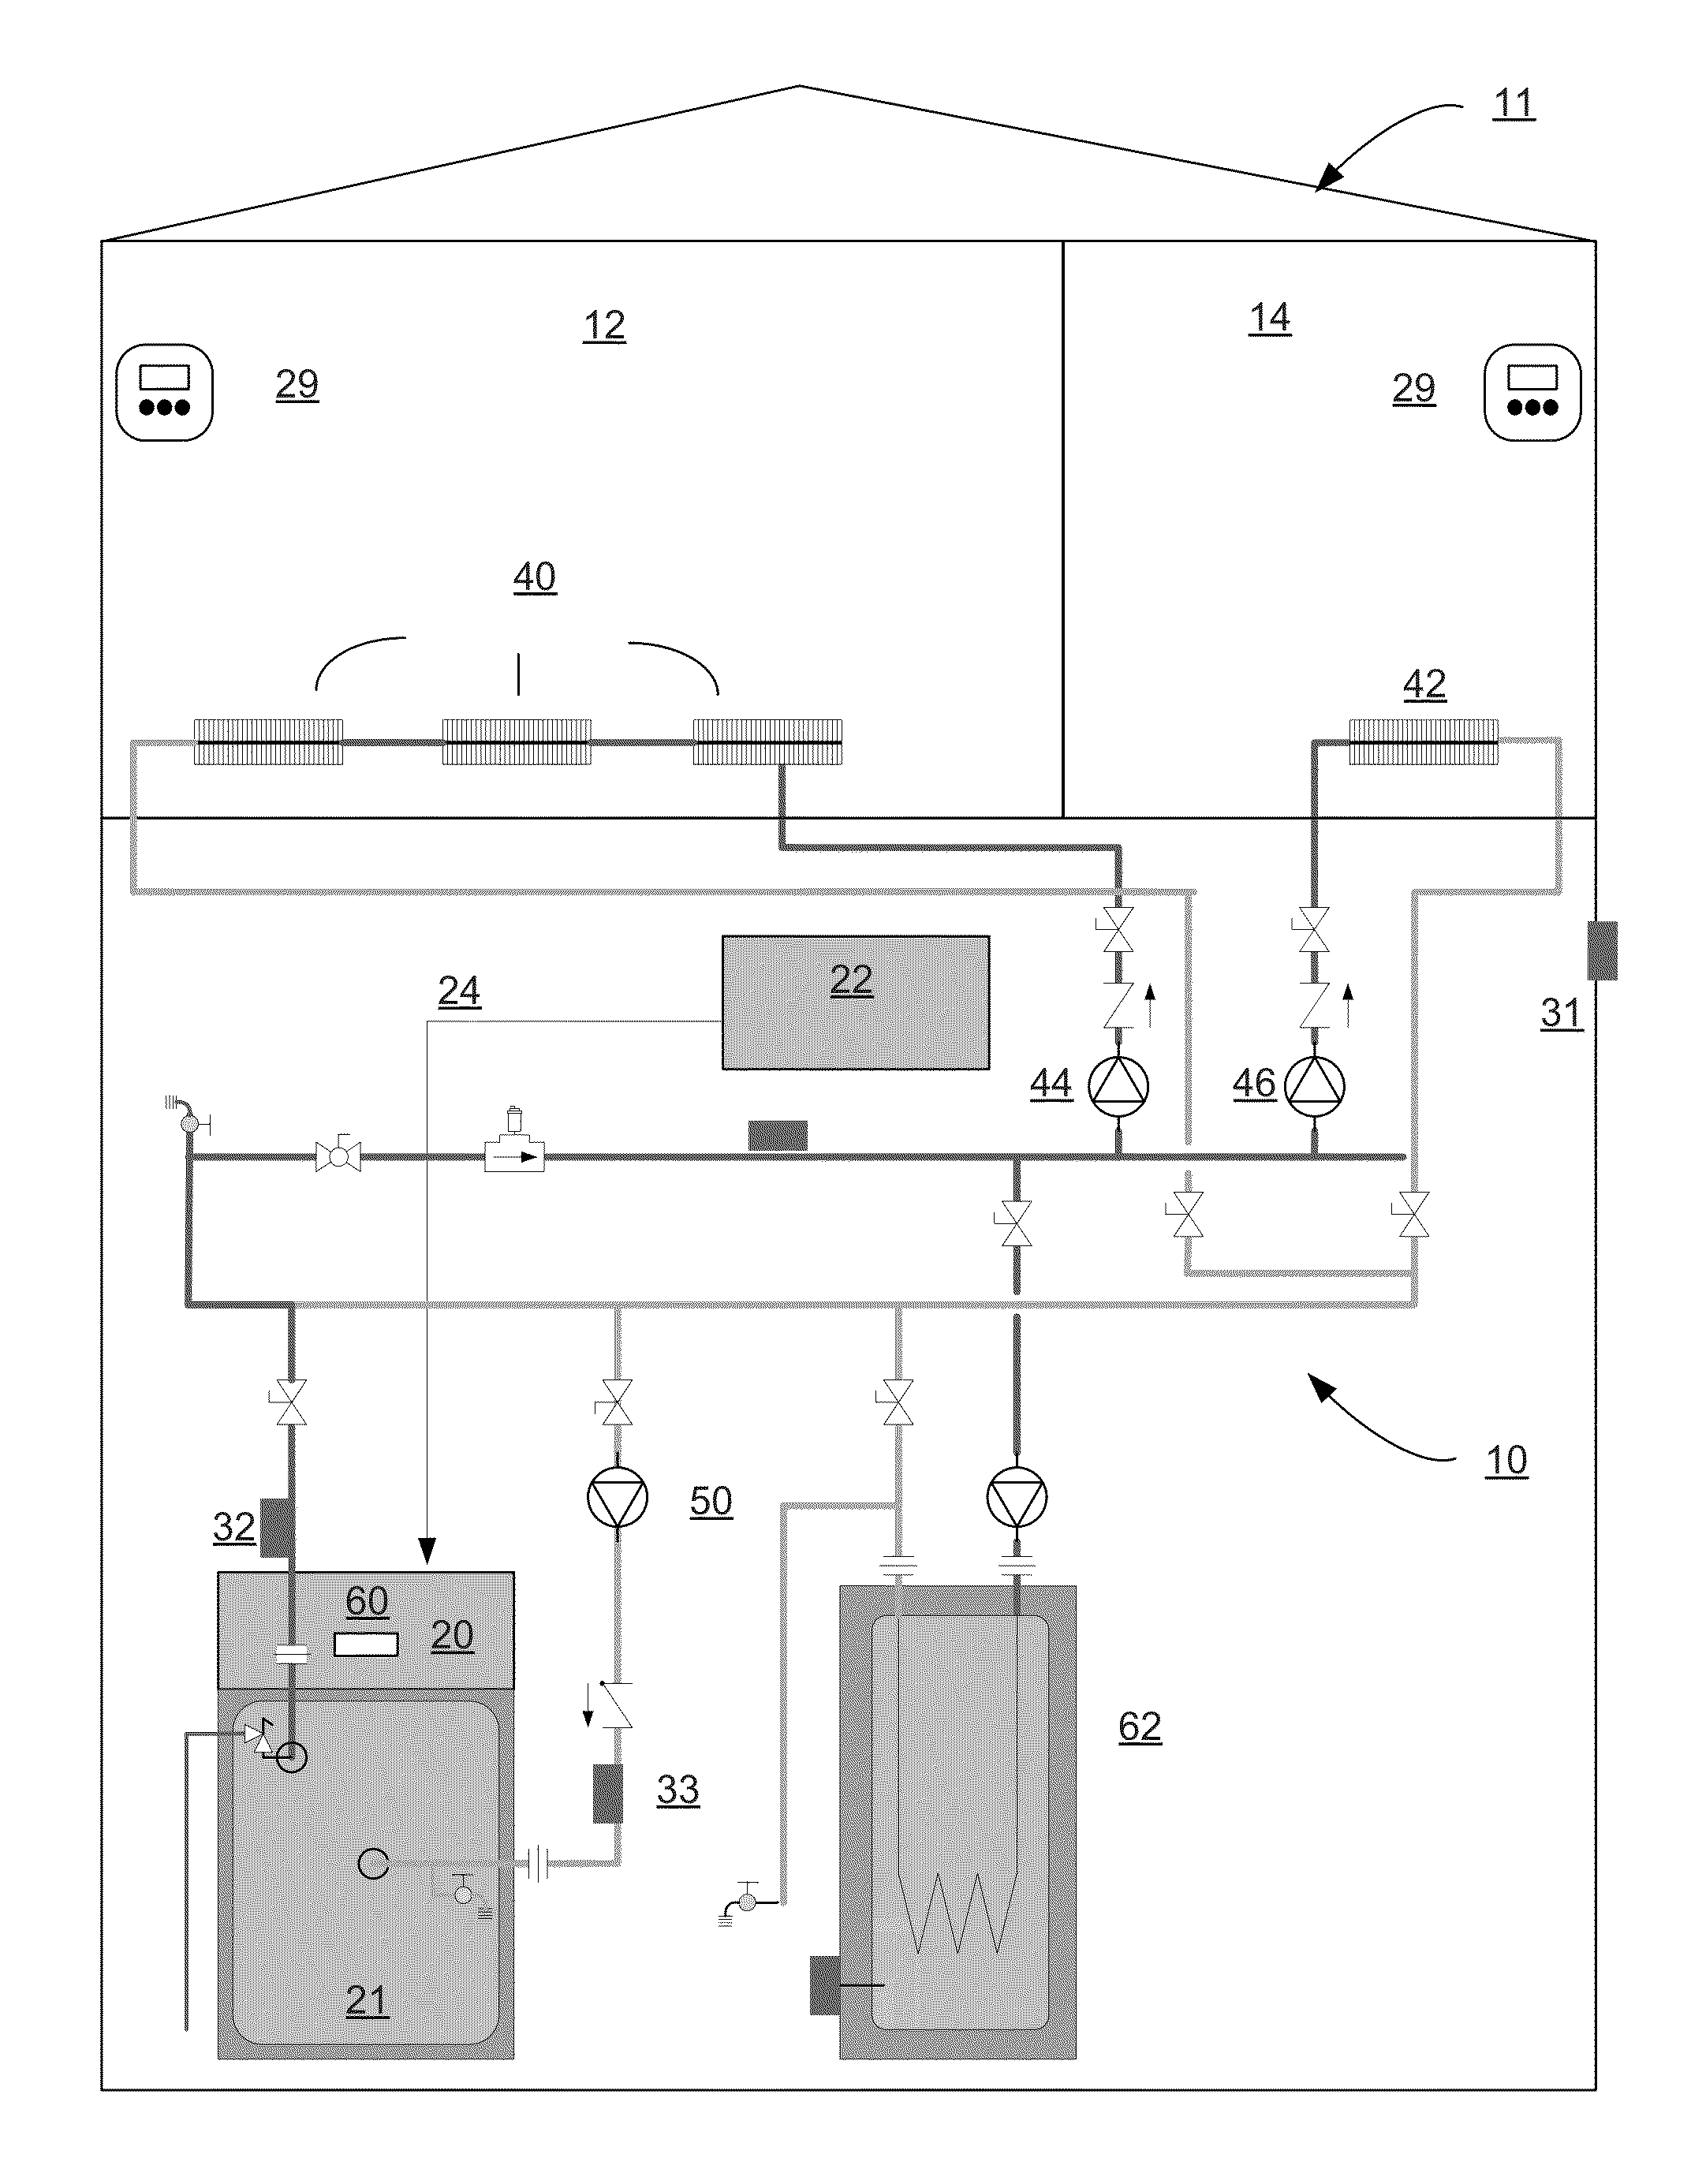 Multiple zone control system and method of operation